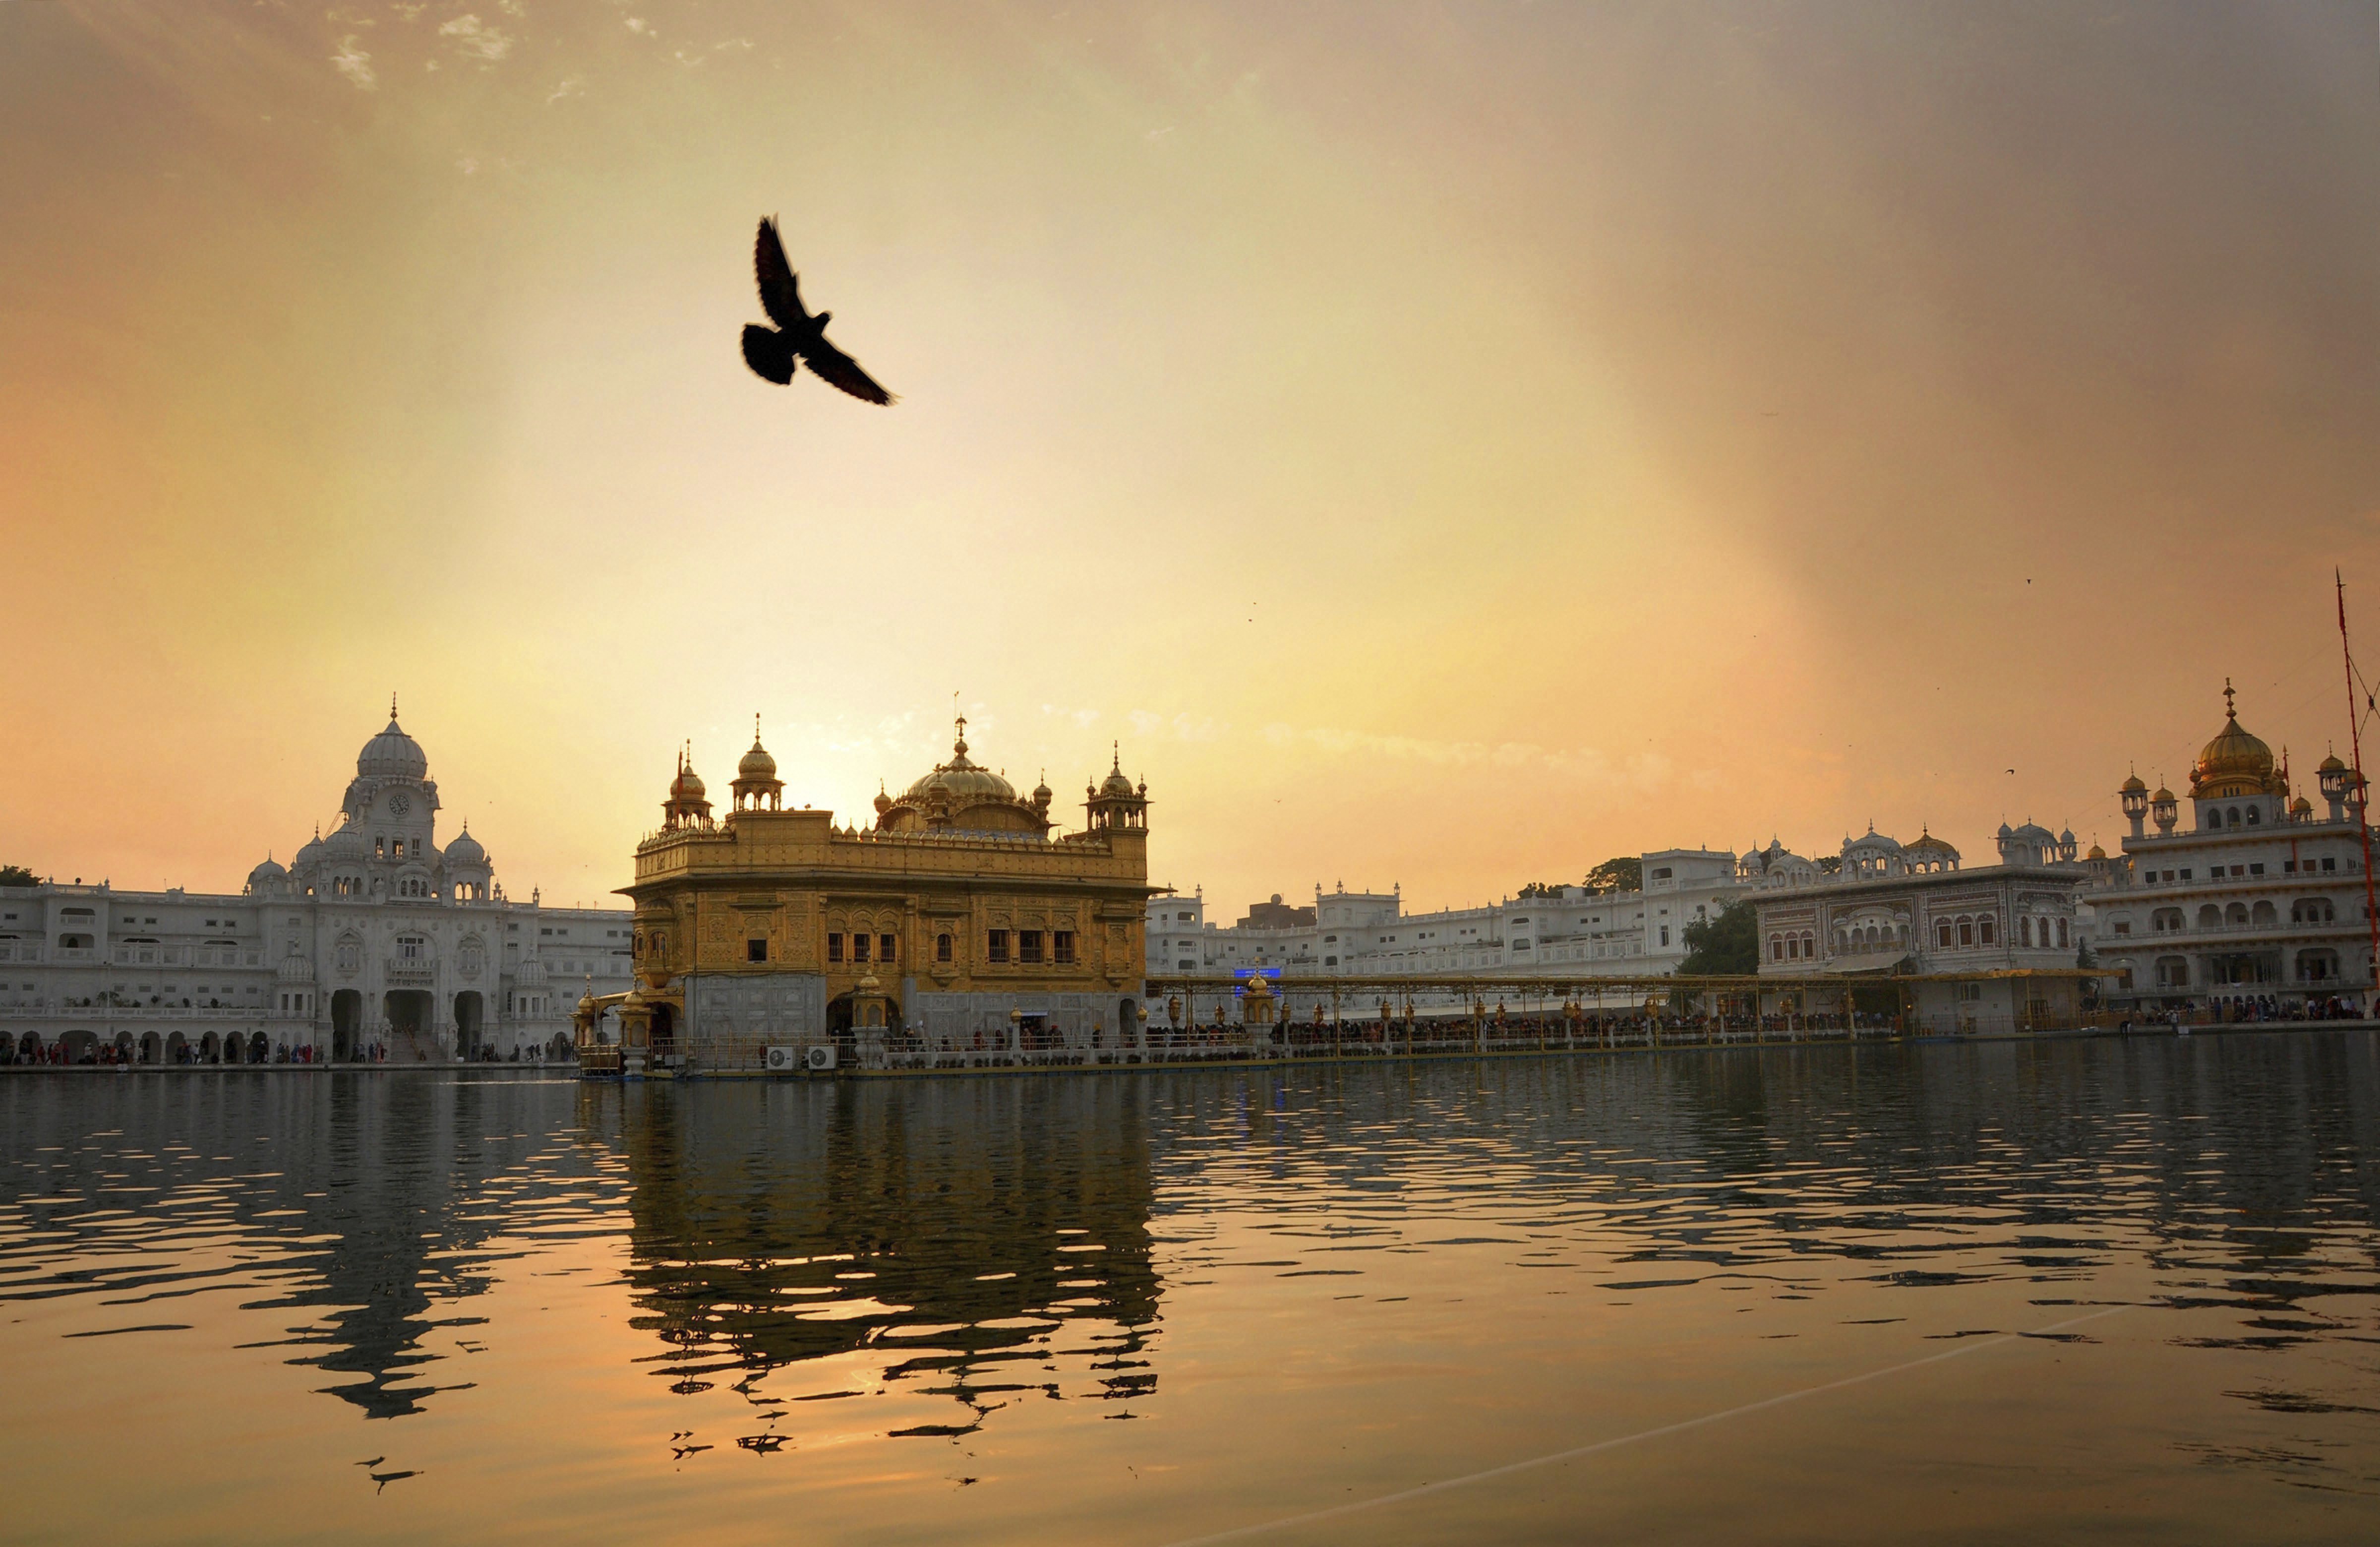 Today's Photo : Golden Temple during Sunset